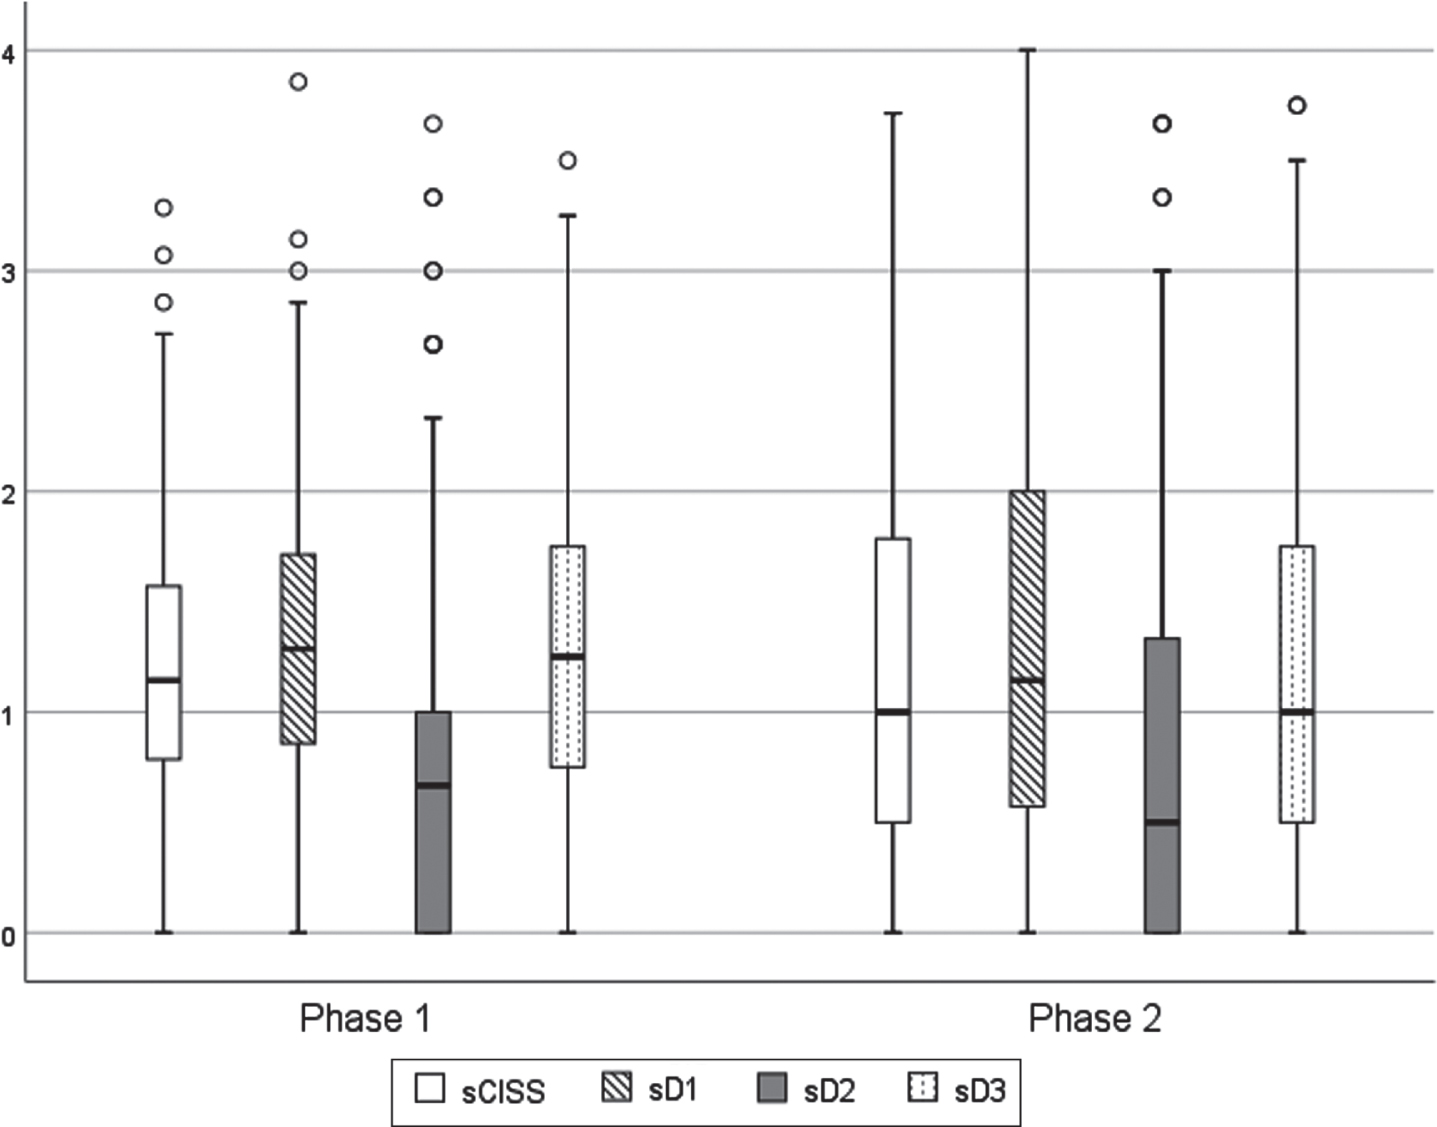 Distribution of standardized scores of the questionnaire, in the two evaluation moments. CISS – total questionnaire; D1 – Dimension 1 (somatic sensations); D2 – Dimension 2 (impaired vision); D3 – Dimension 3 (cognitive performance).